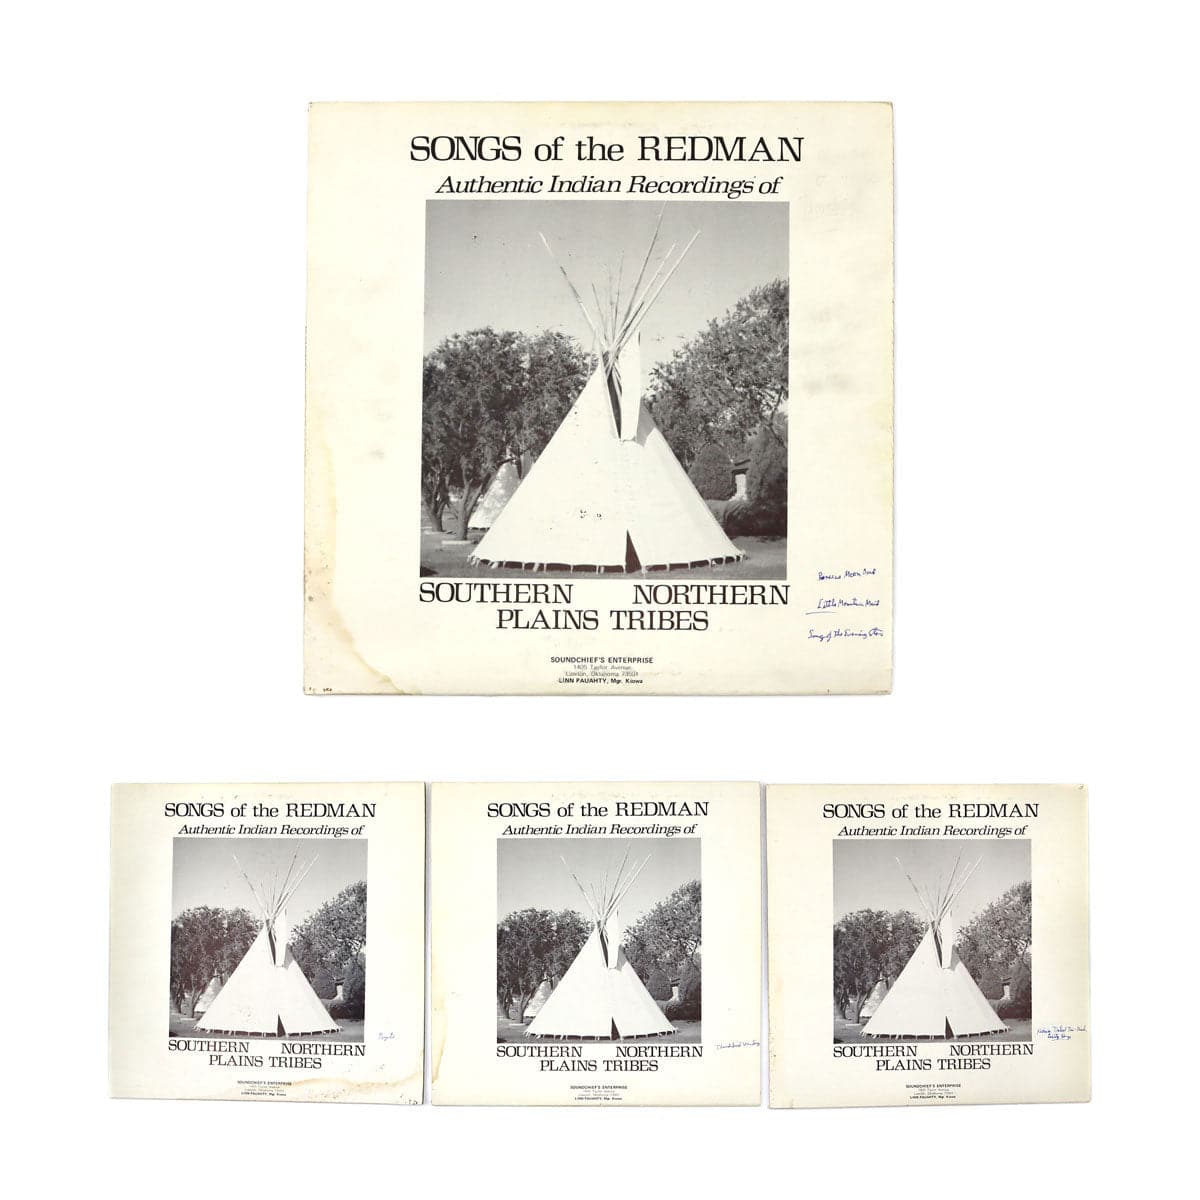 Group of 56 Original Kiowa Drawings, 120 Anko Calendar Drawings, and 13 Vinyl Records of Songs Arranged and Sung by Various Singers of the Southern and Northern Plains Tribes (M90218C-0621-001)23